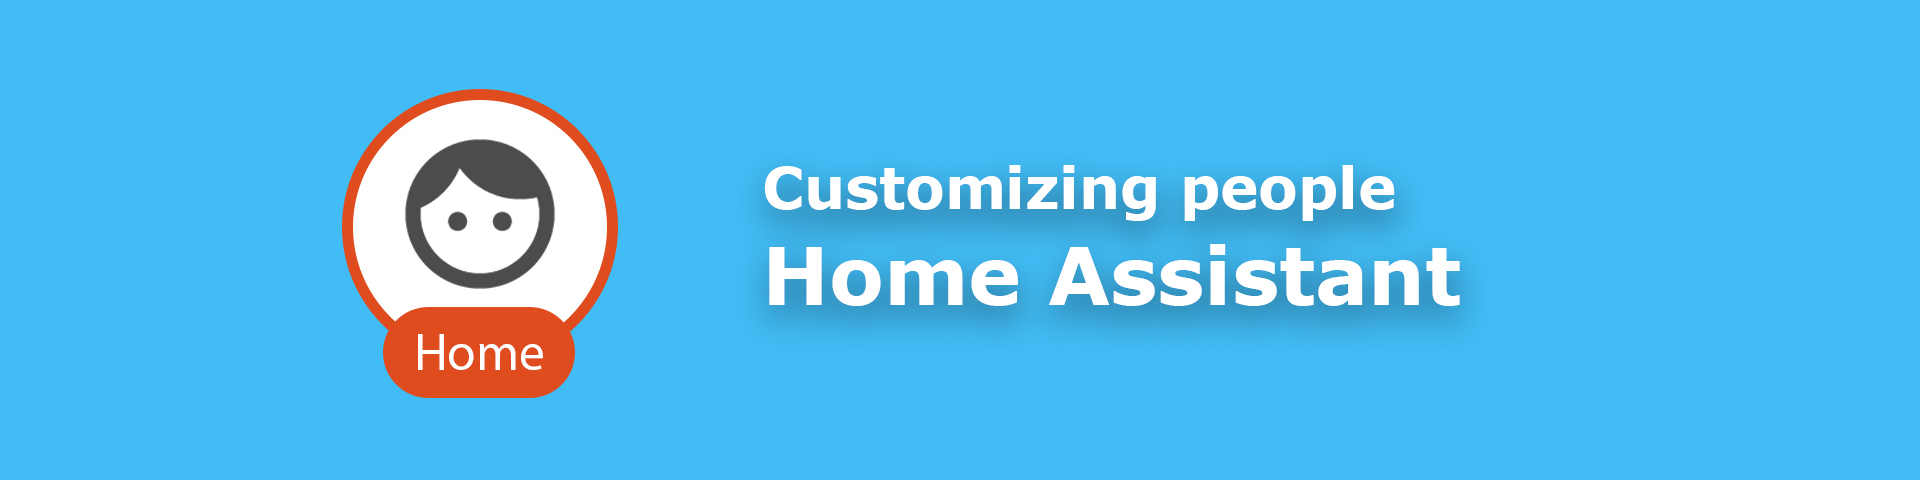 Images for people in Home Assistant